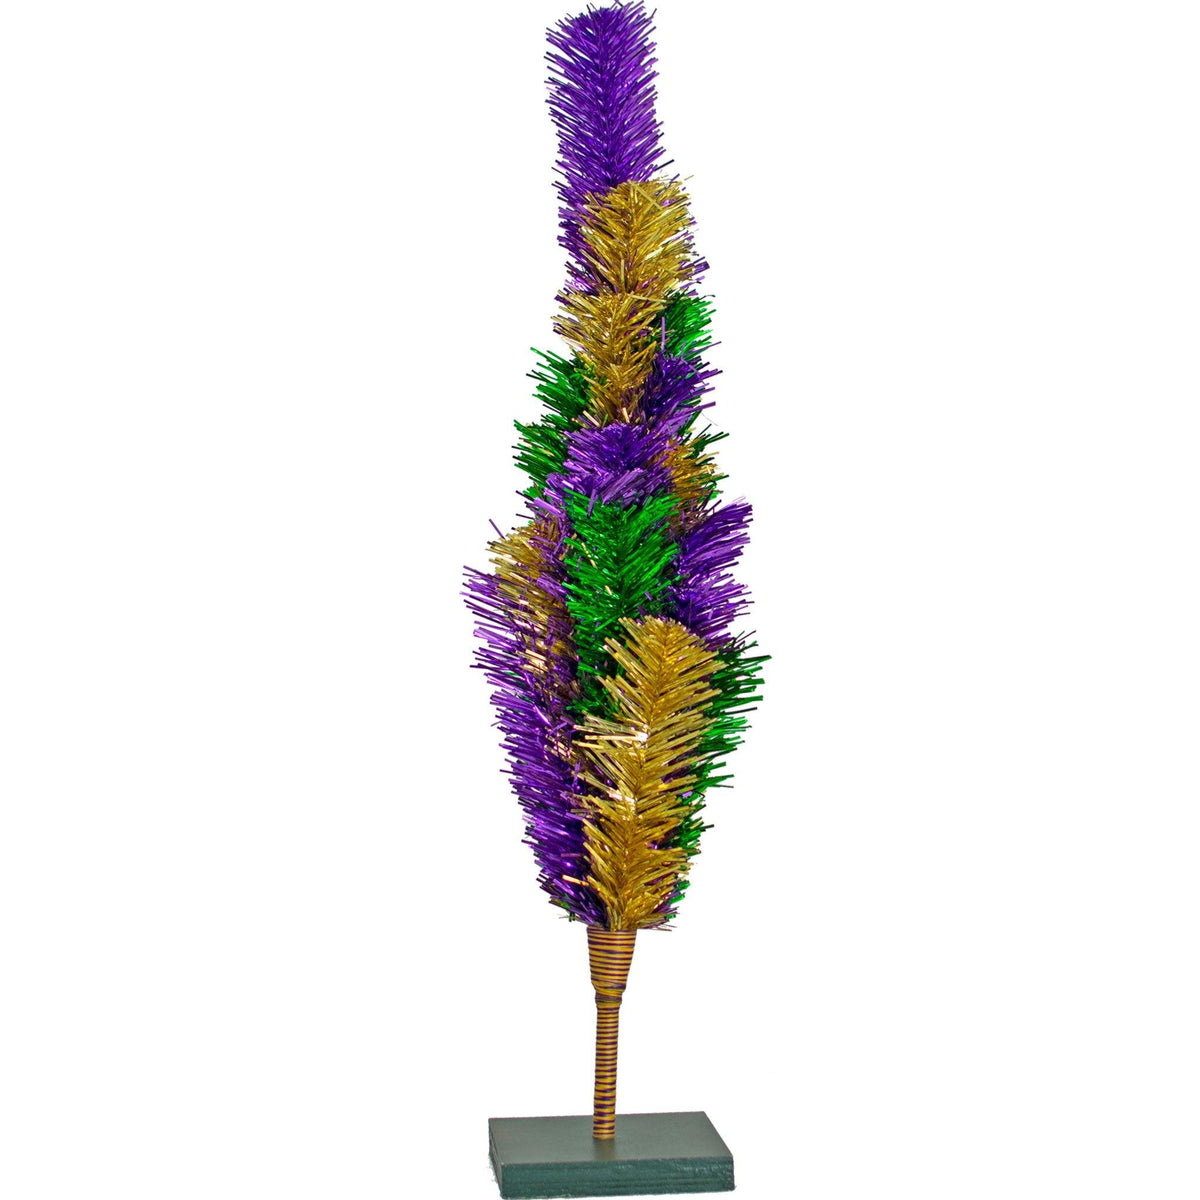 Introducing Lee Display's brand new Purple, Green, & Gold Christmas Trees made by hand in the USA!    Decorate your holidays with a classic Mardi Gras-themed Tinsel Christmas Tree on sale at leedisplay.com